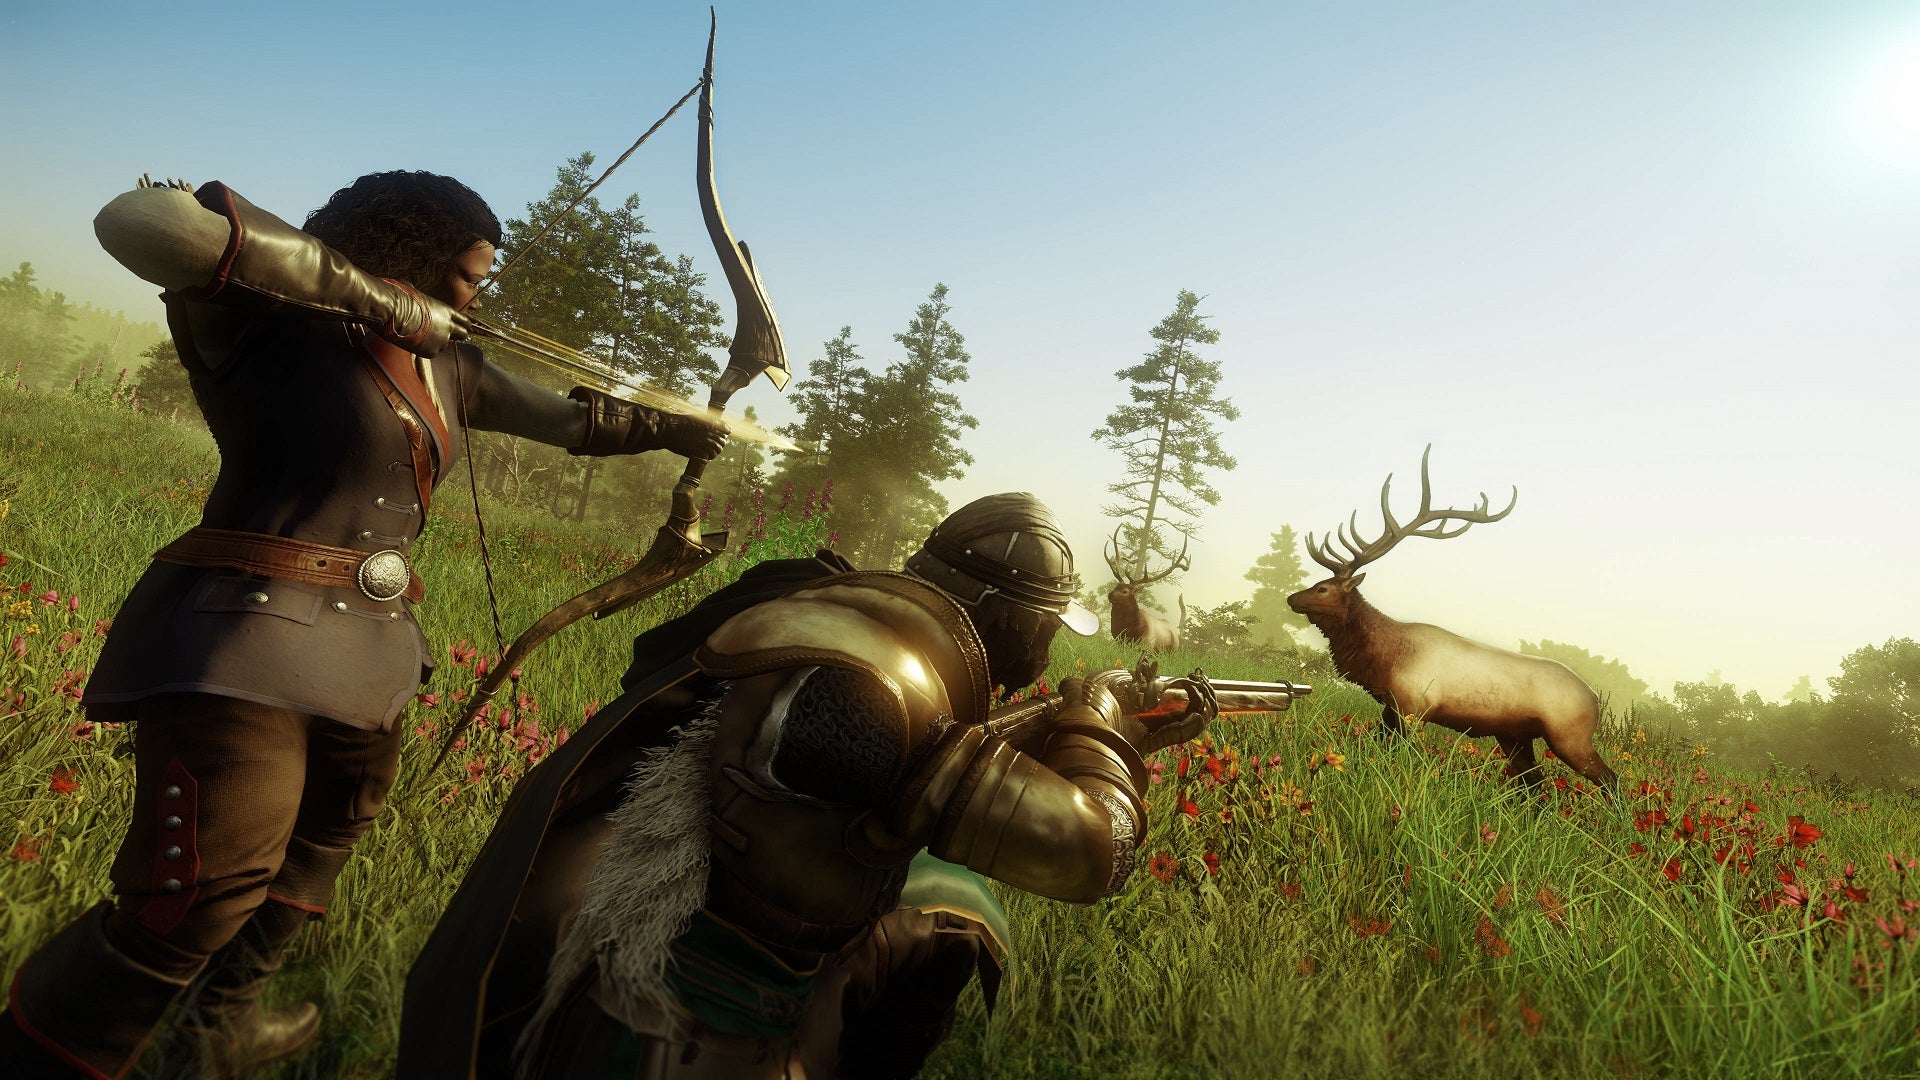 Two New World characters hunting a deer using a bow and a musket.